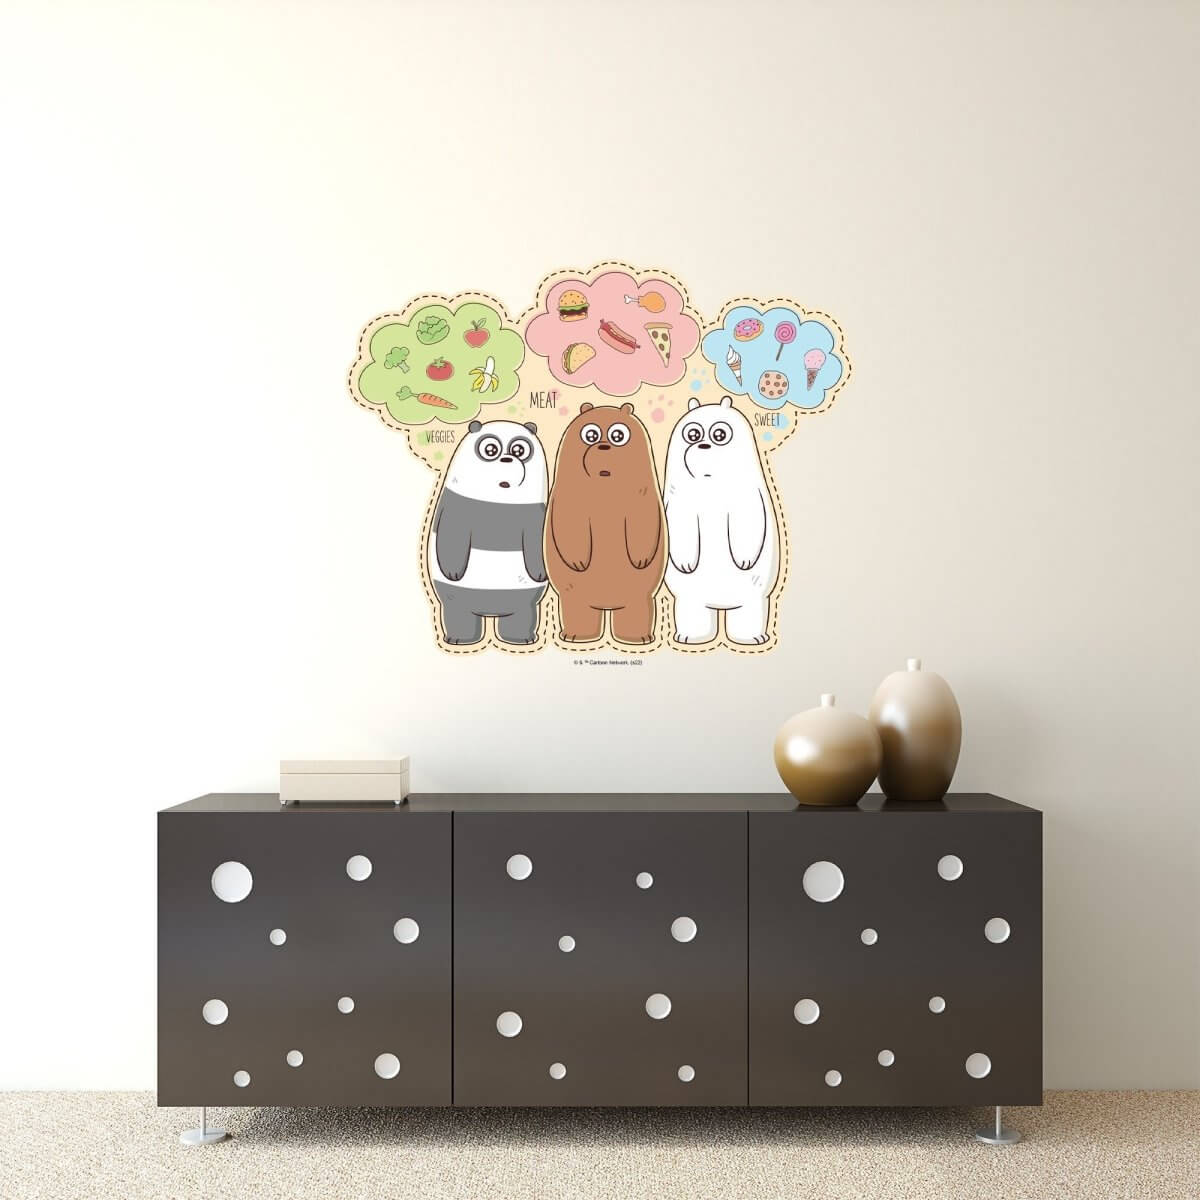 Kismet Decals Home & Room Decor We Bare Bears Favorite Foods Wall decal sticker - officially licensed - latex printed with no solvent odor - Kismet Decals